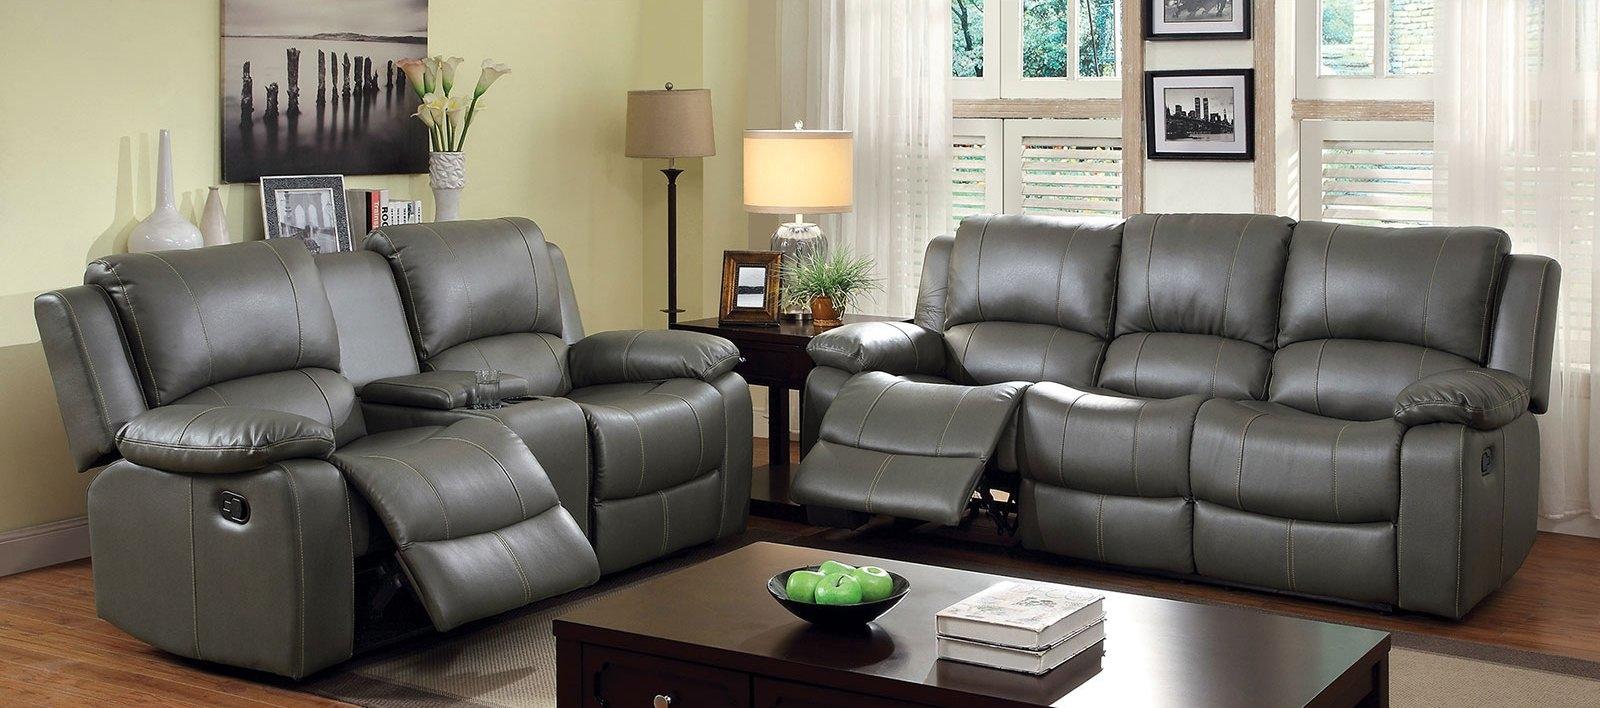 Transitional Recliner Sofa Loveseat and Chair CM6326-3PC Sarles CM6326-3PC in Gray Bonded Leather